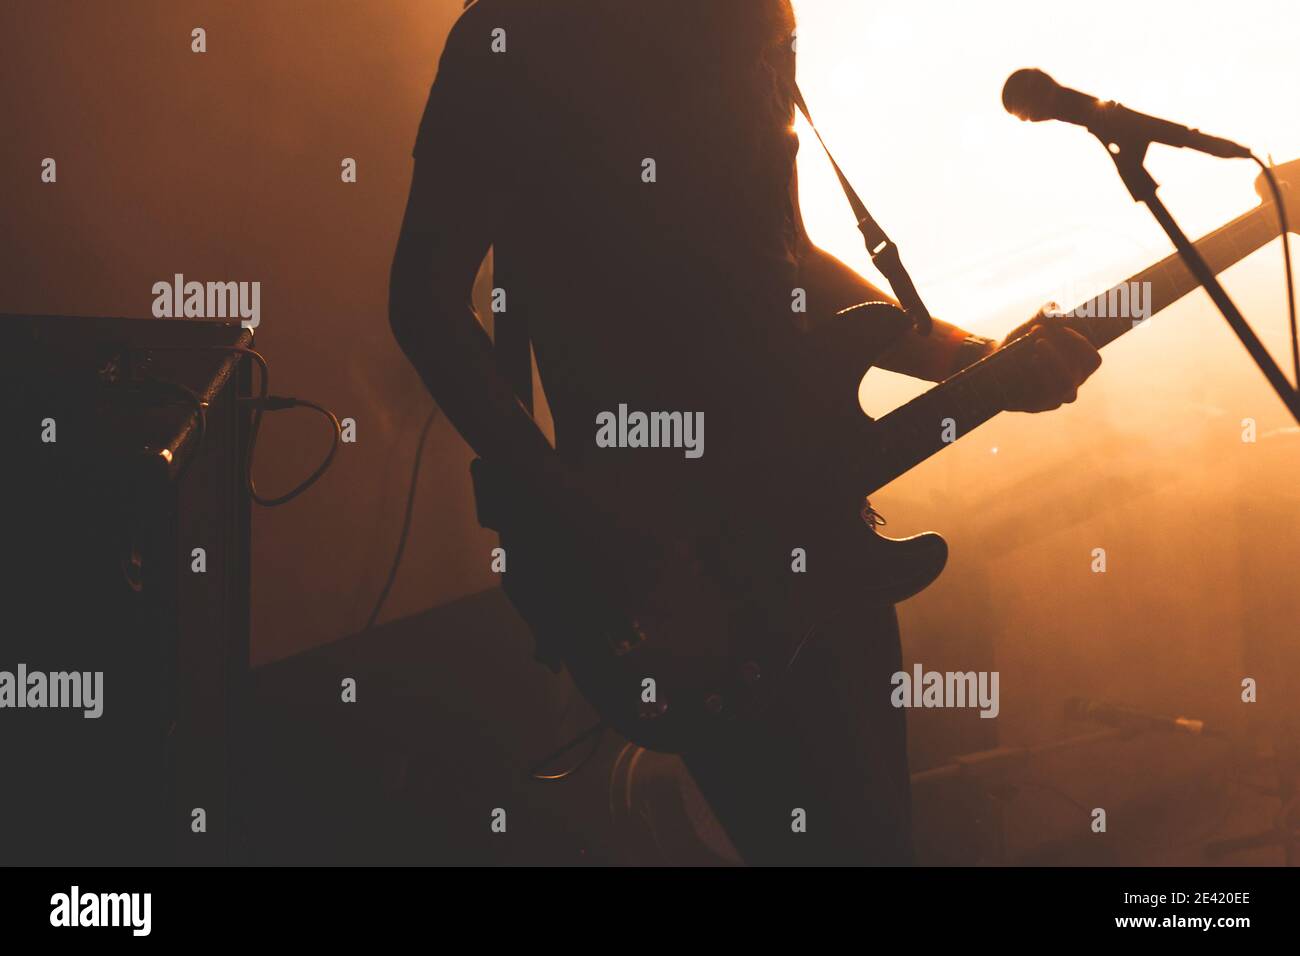 Silhouette of bass guitar player with microphone in bright warm illumination, live music theme Stock Photo